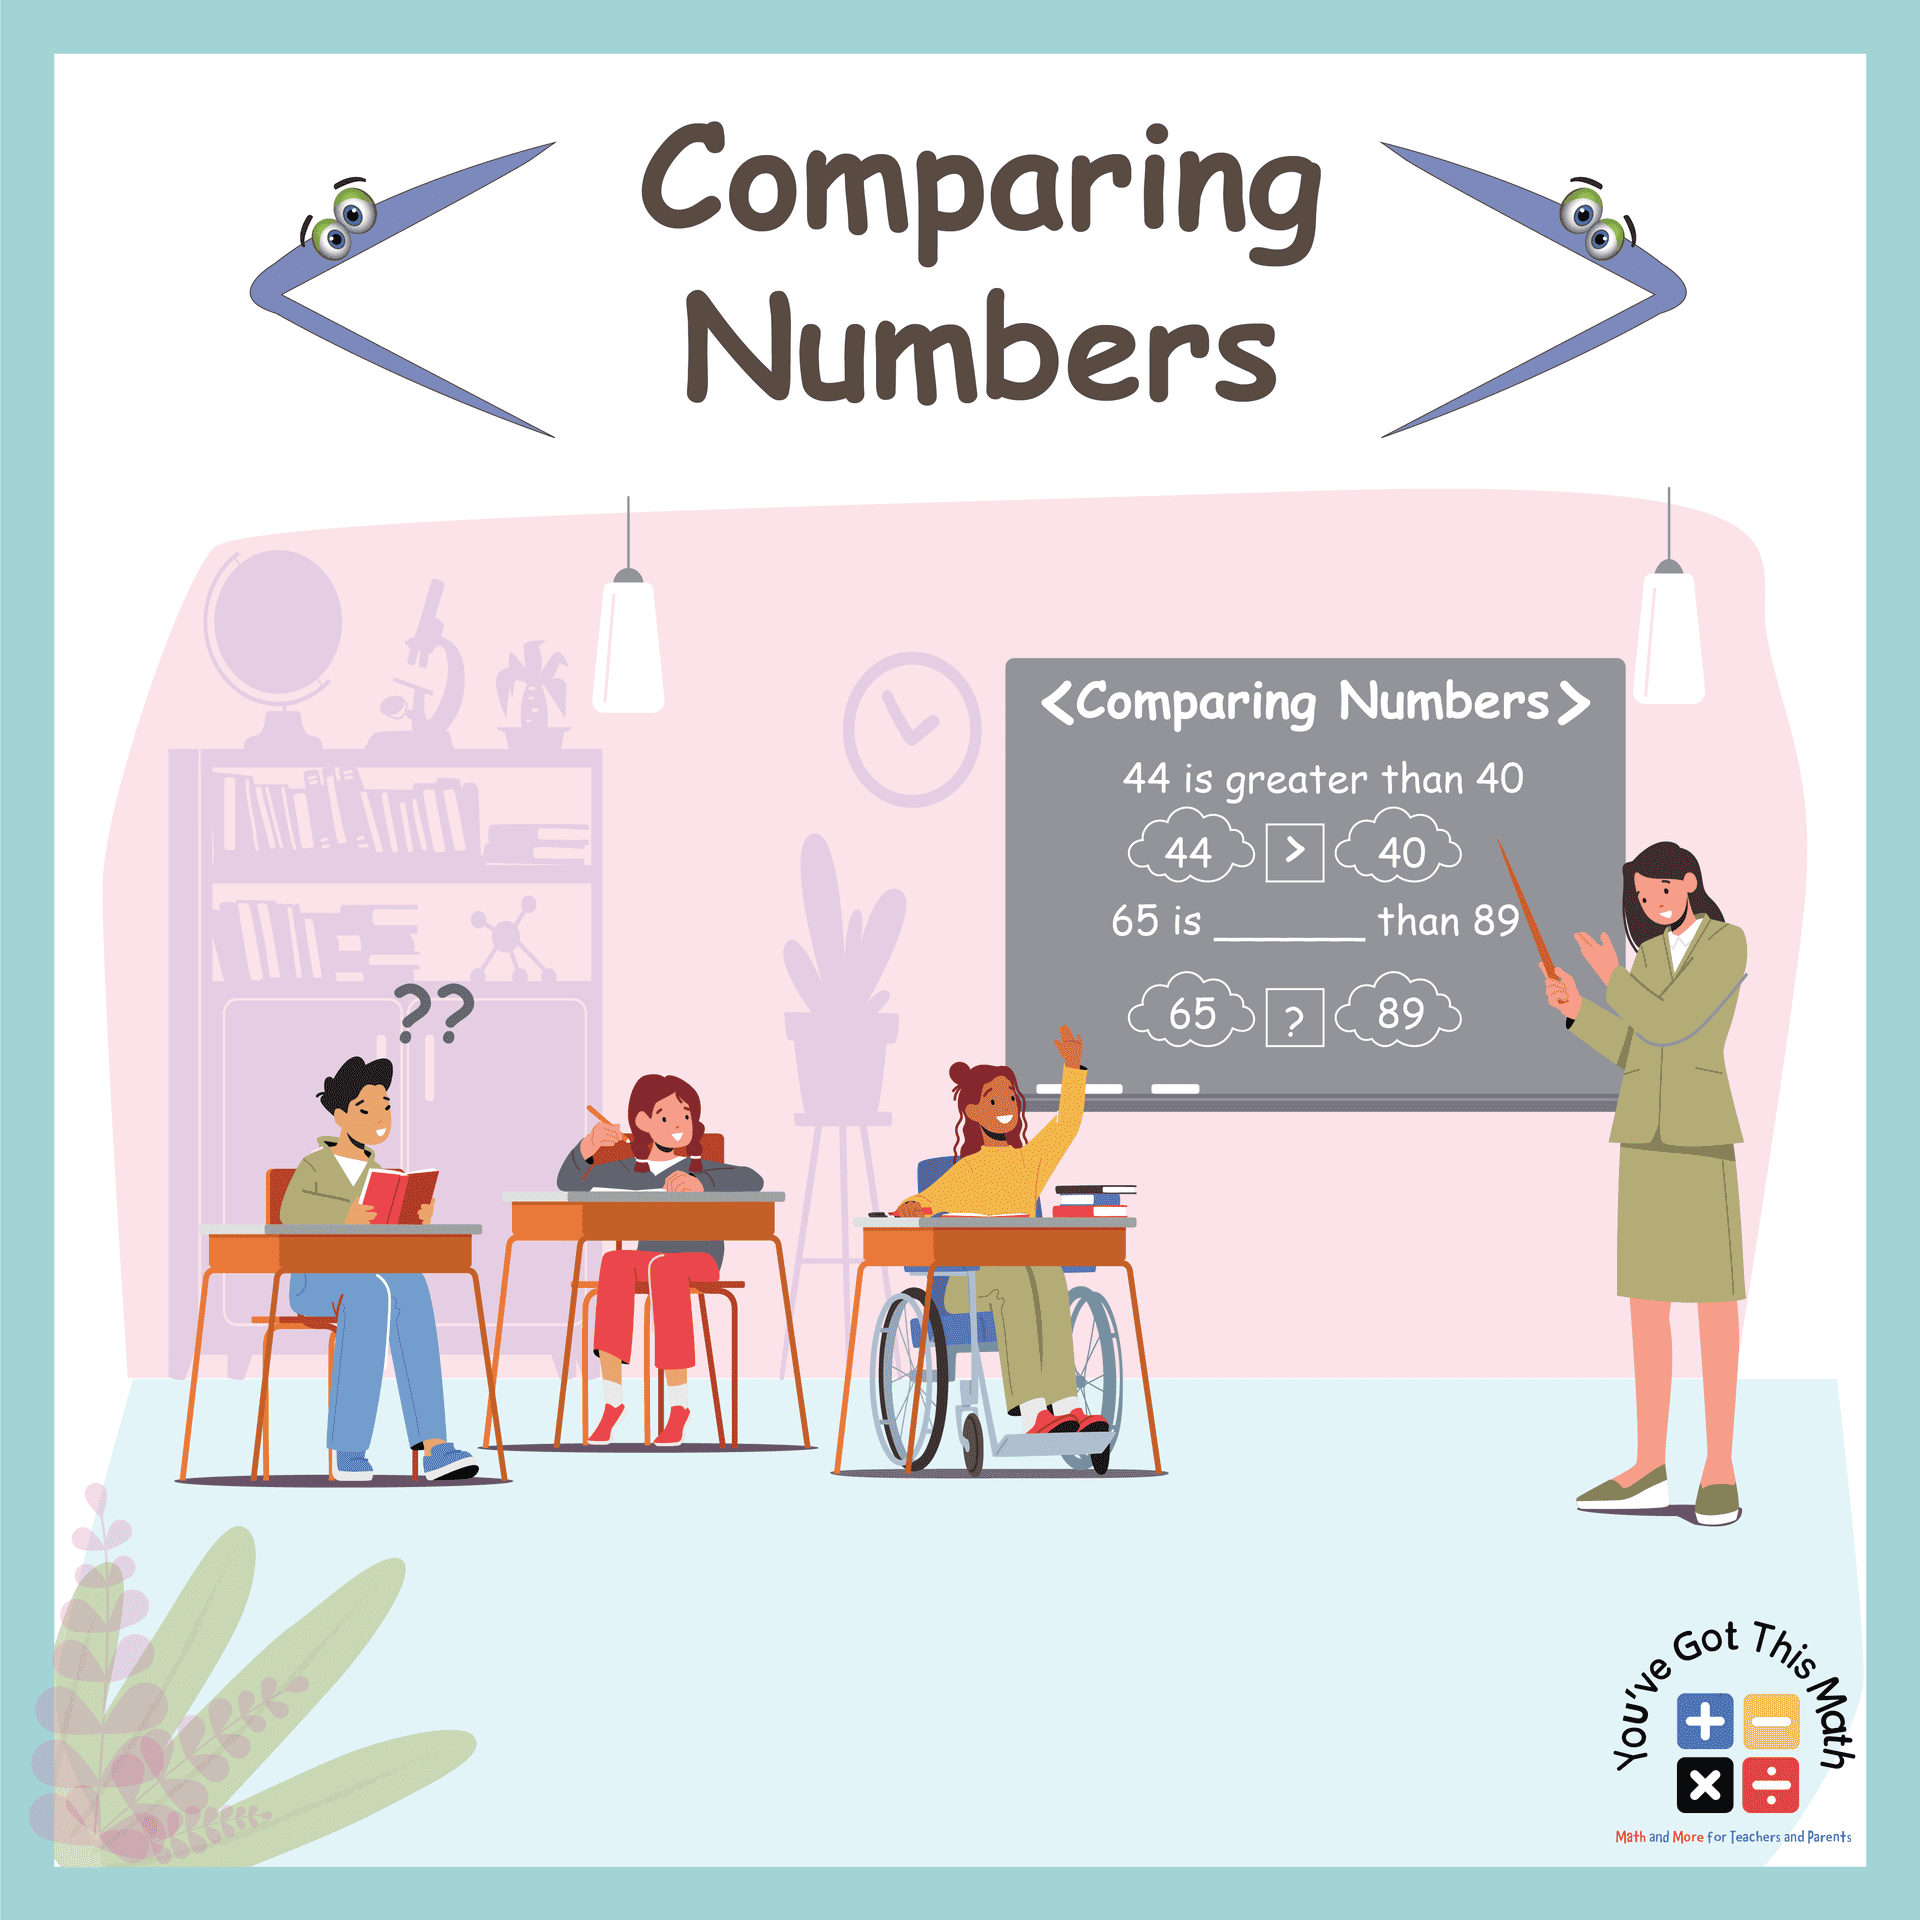 Comparing Numbers Worksheets Intro Image-01